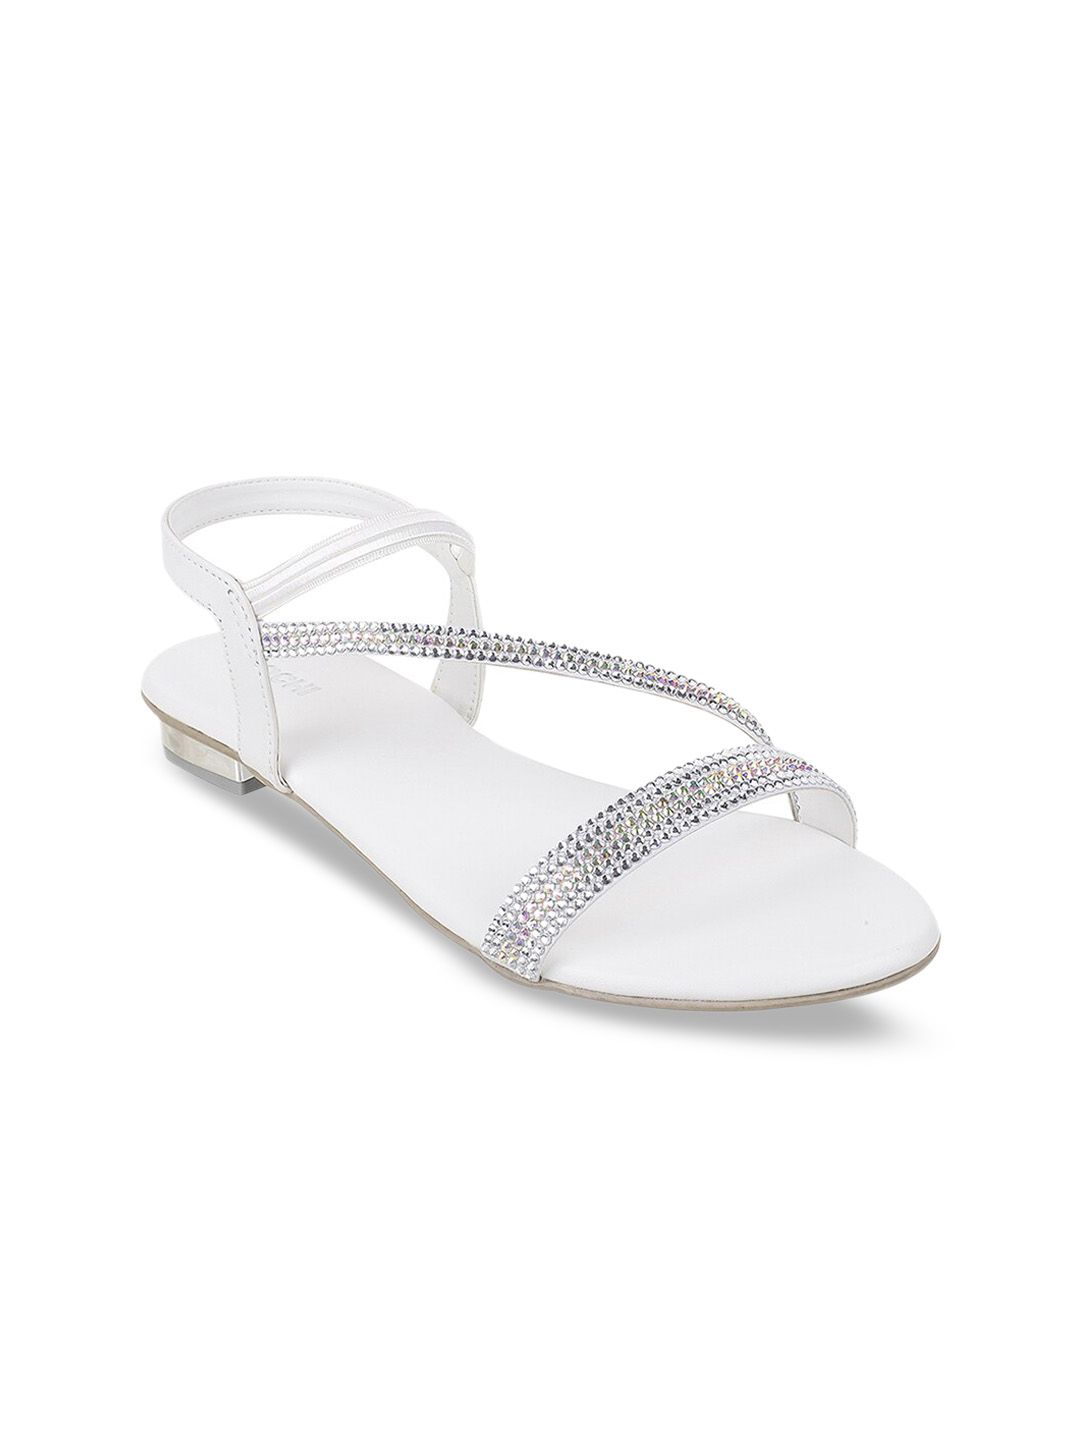 Mochi Women White Embellished Open Toe Flats Price in India